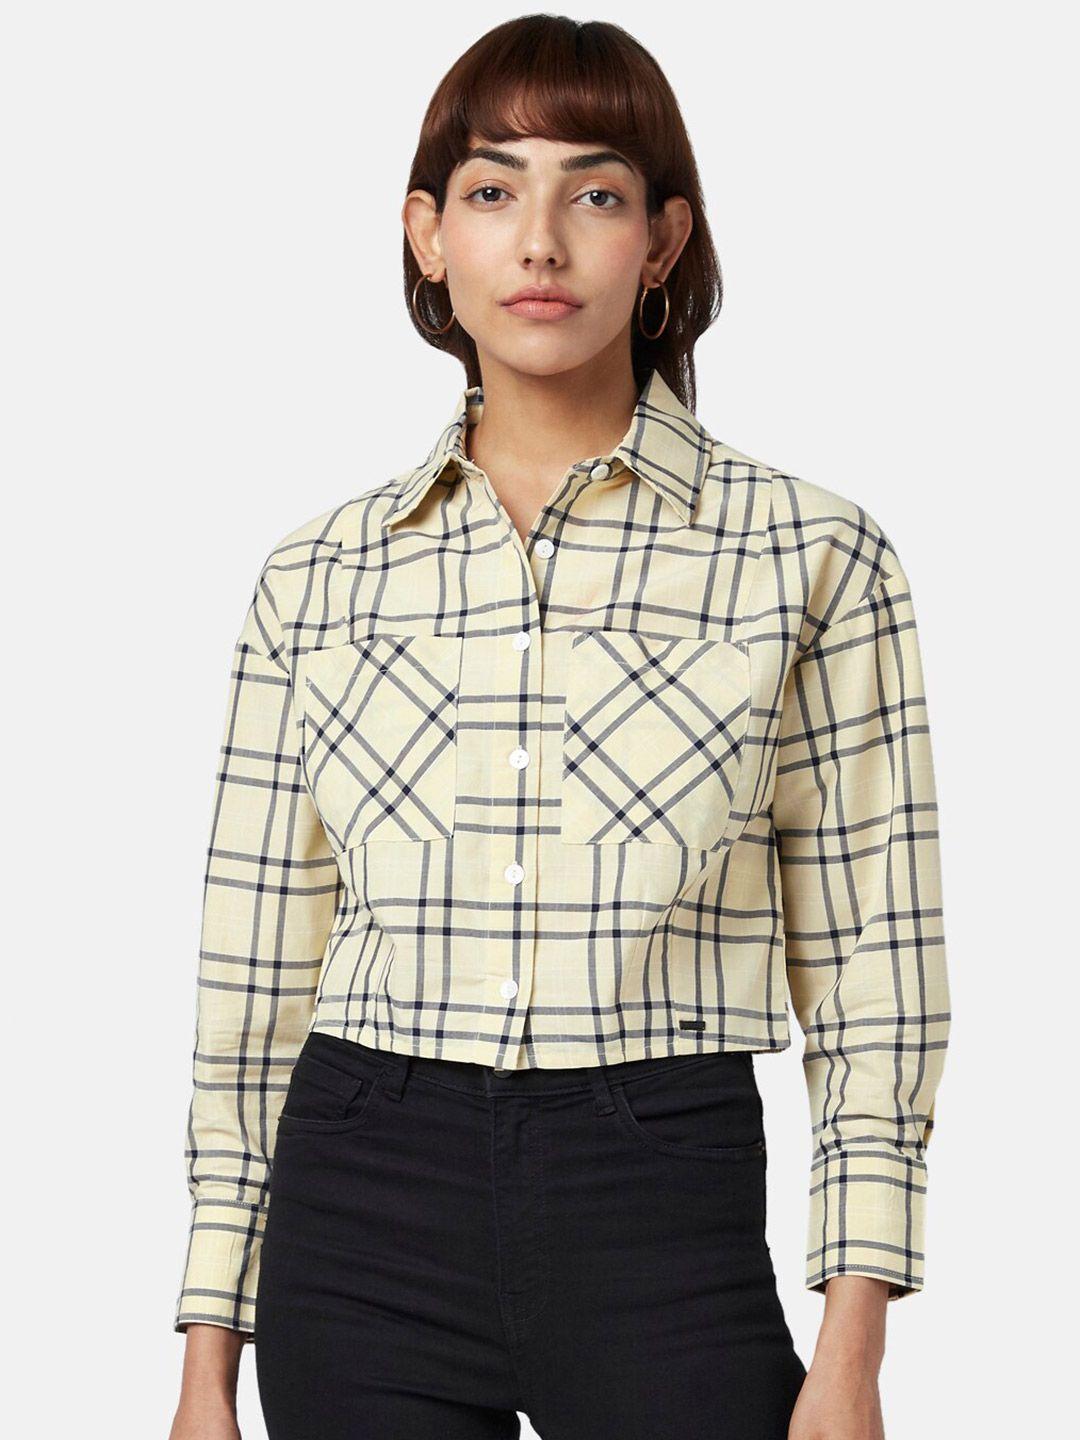 sf jeans by pantaloons women off white & yellow tartan checked cotton casual shirt